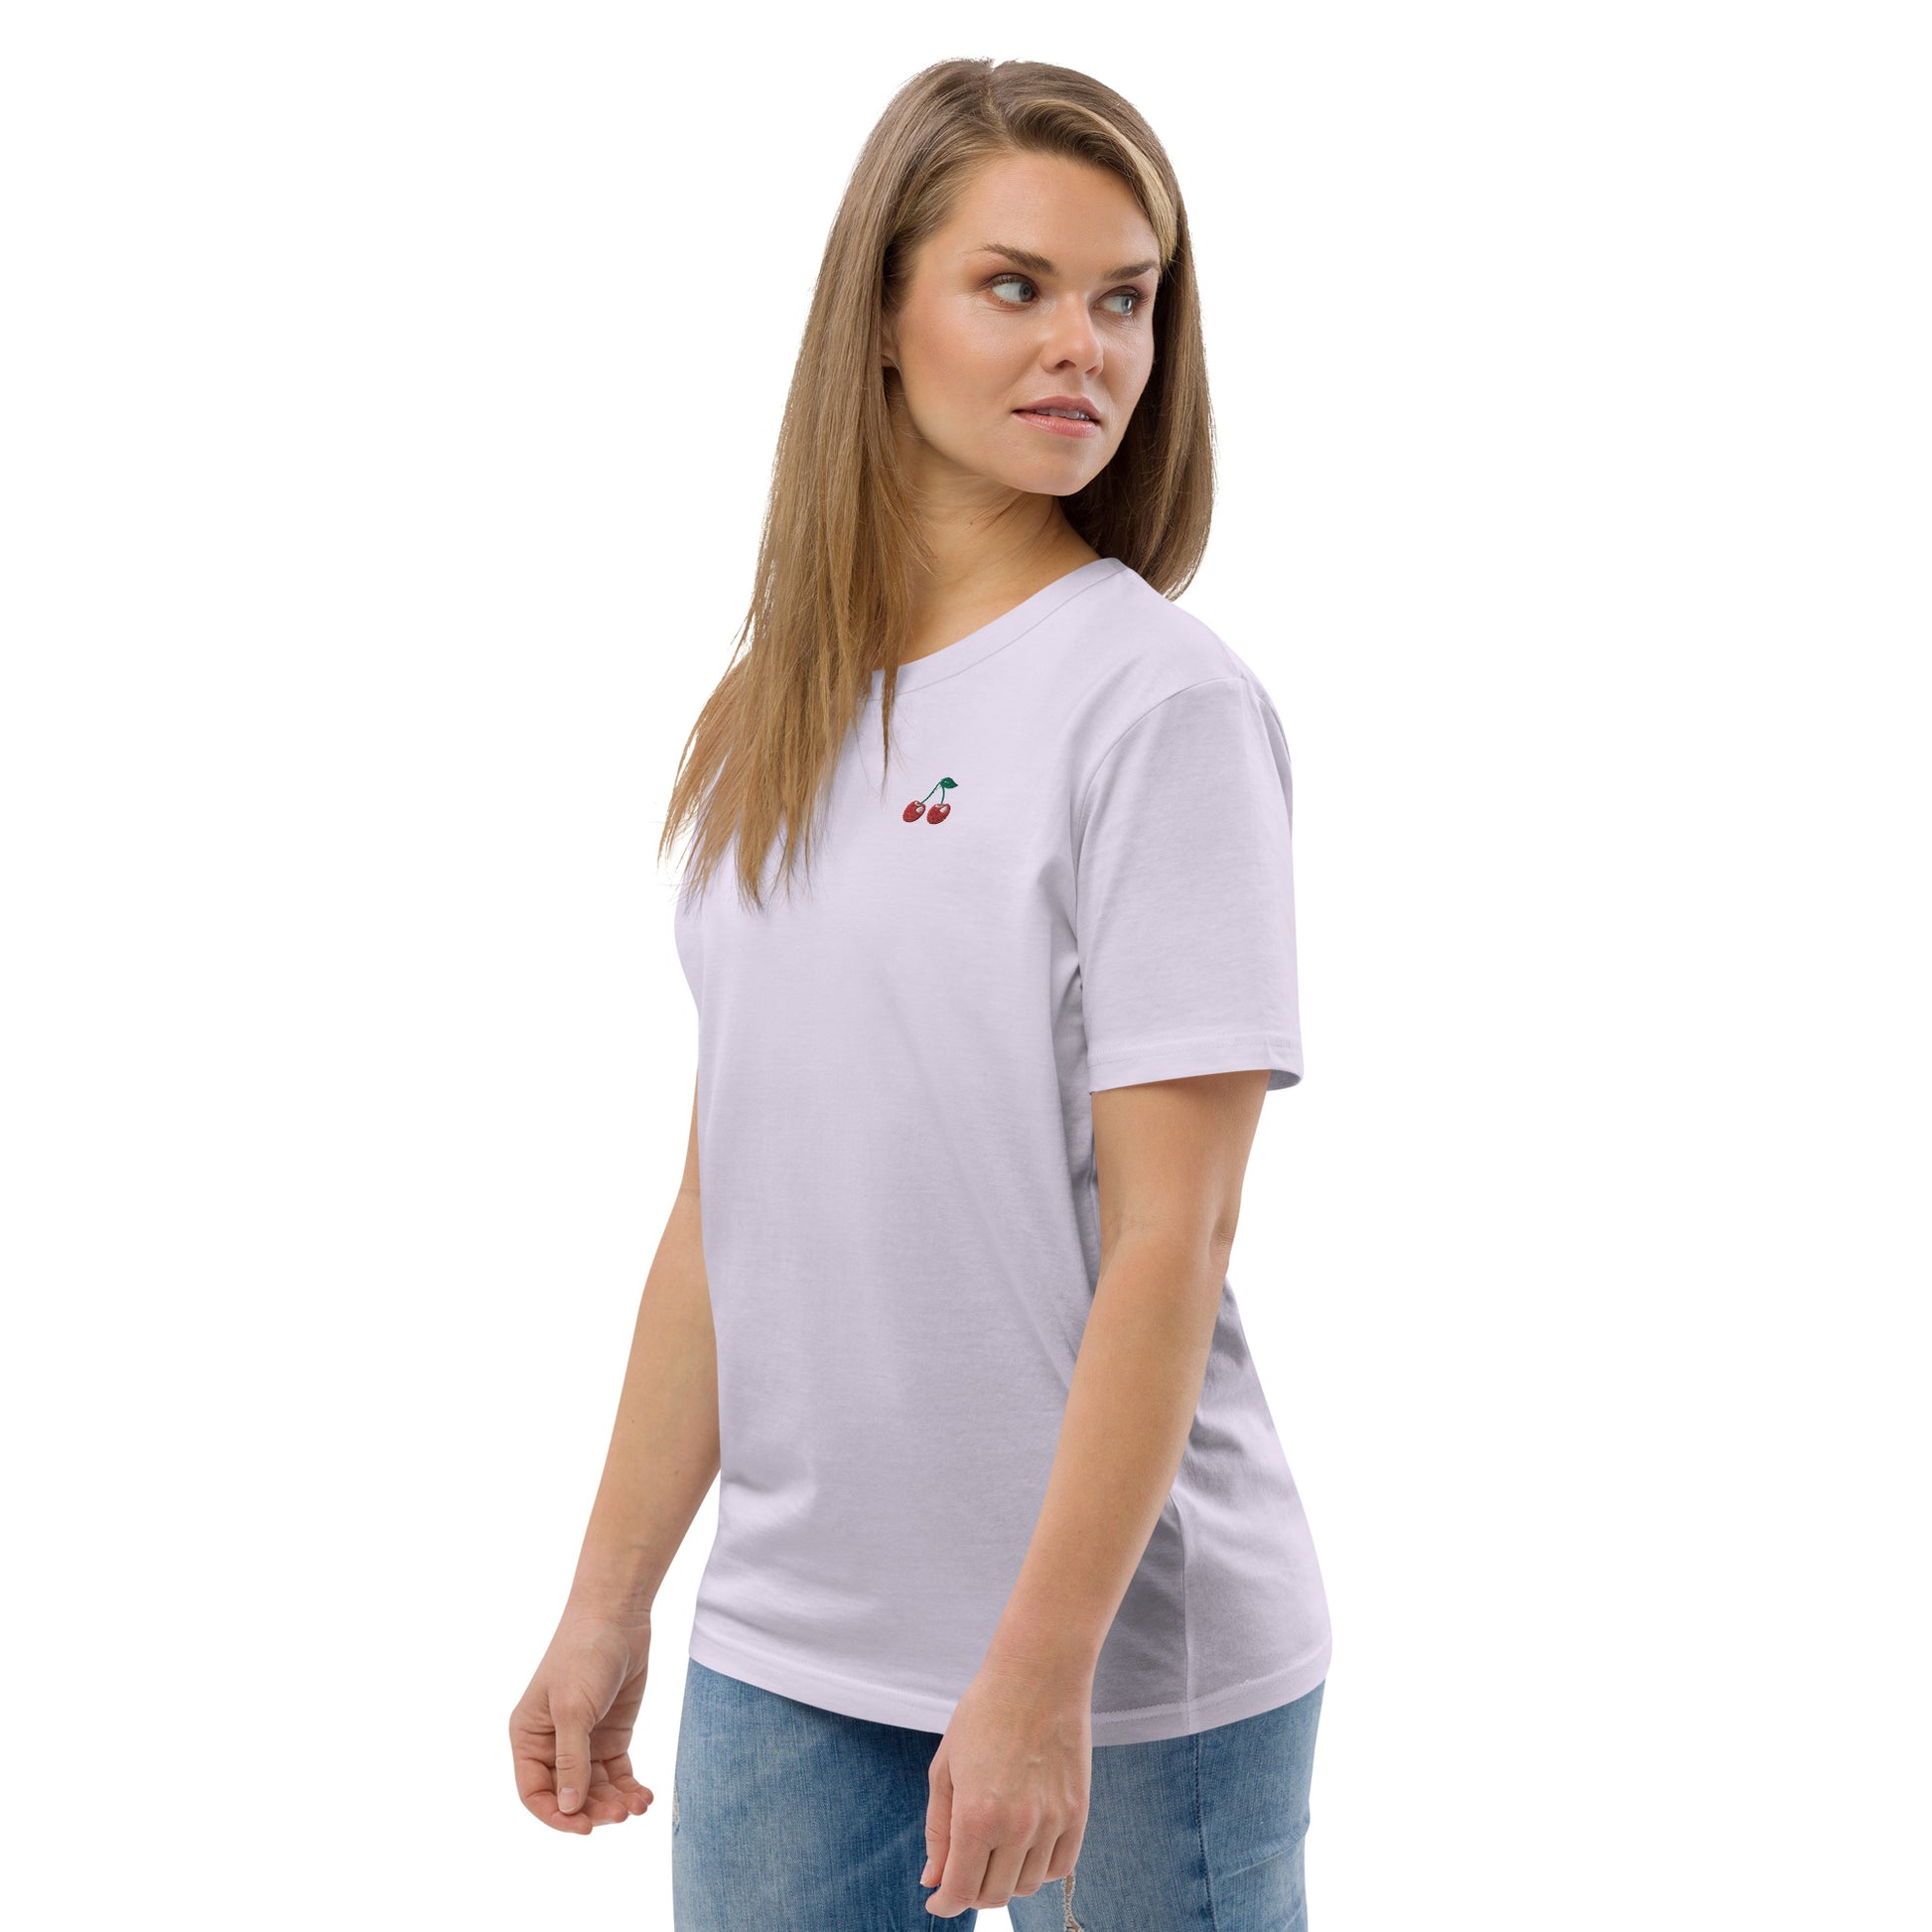 Female model wearing a relaxed lavender organic cotton t-shirt with small embroidered red cherries on the left chest. Available in sizes S to 3XL.